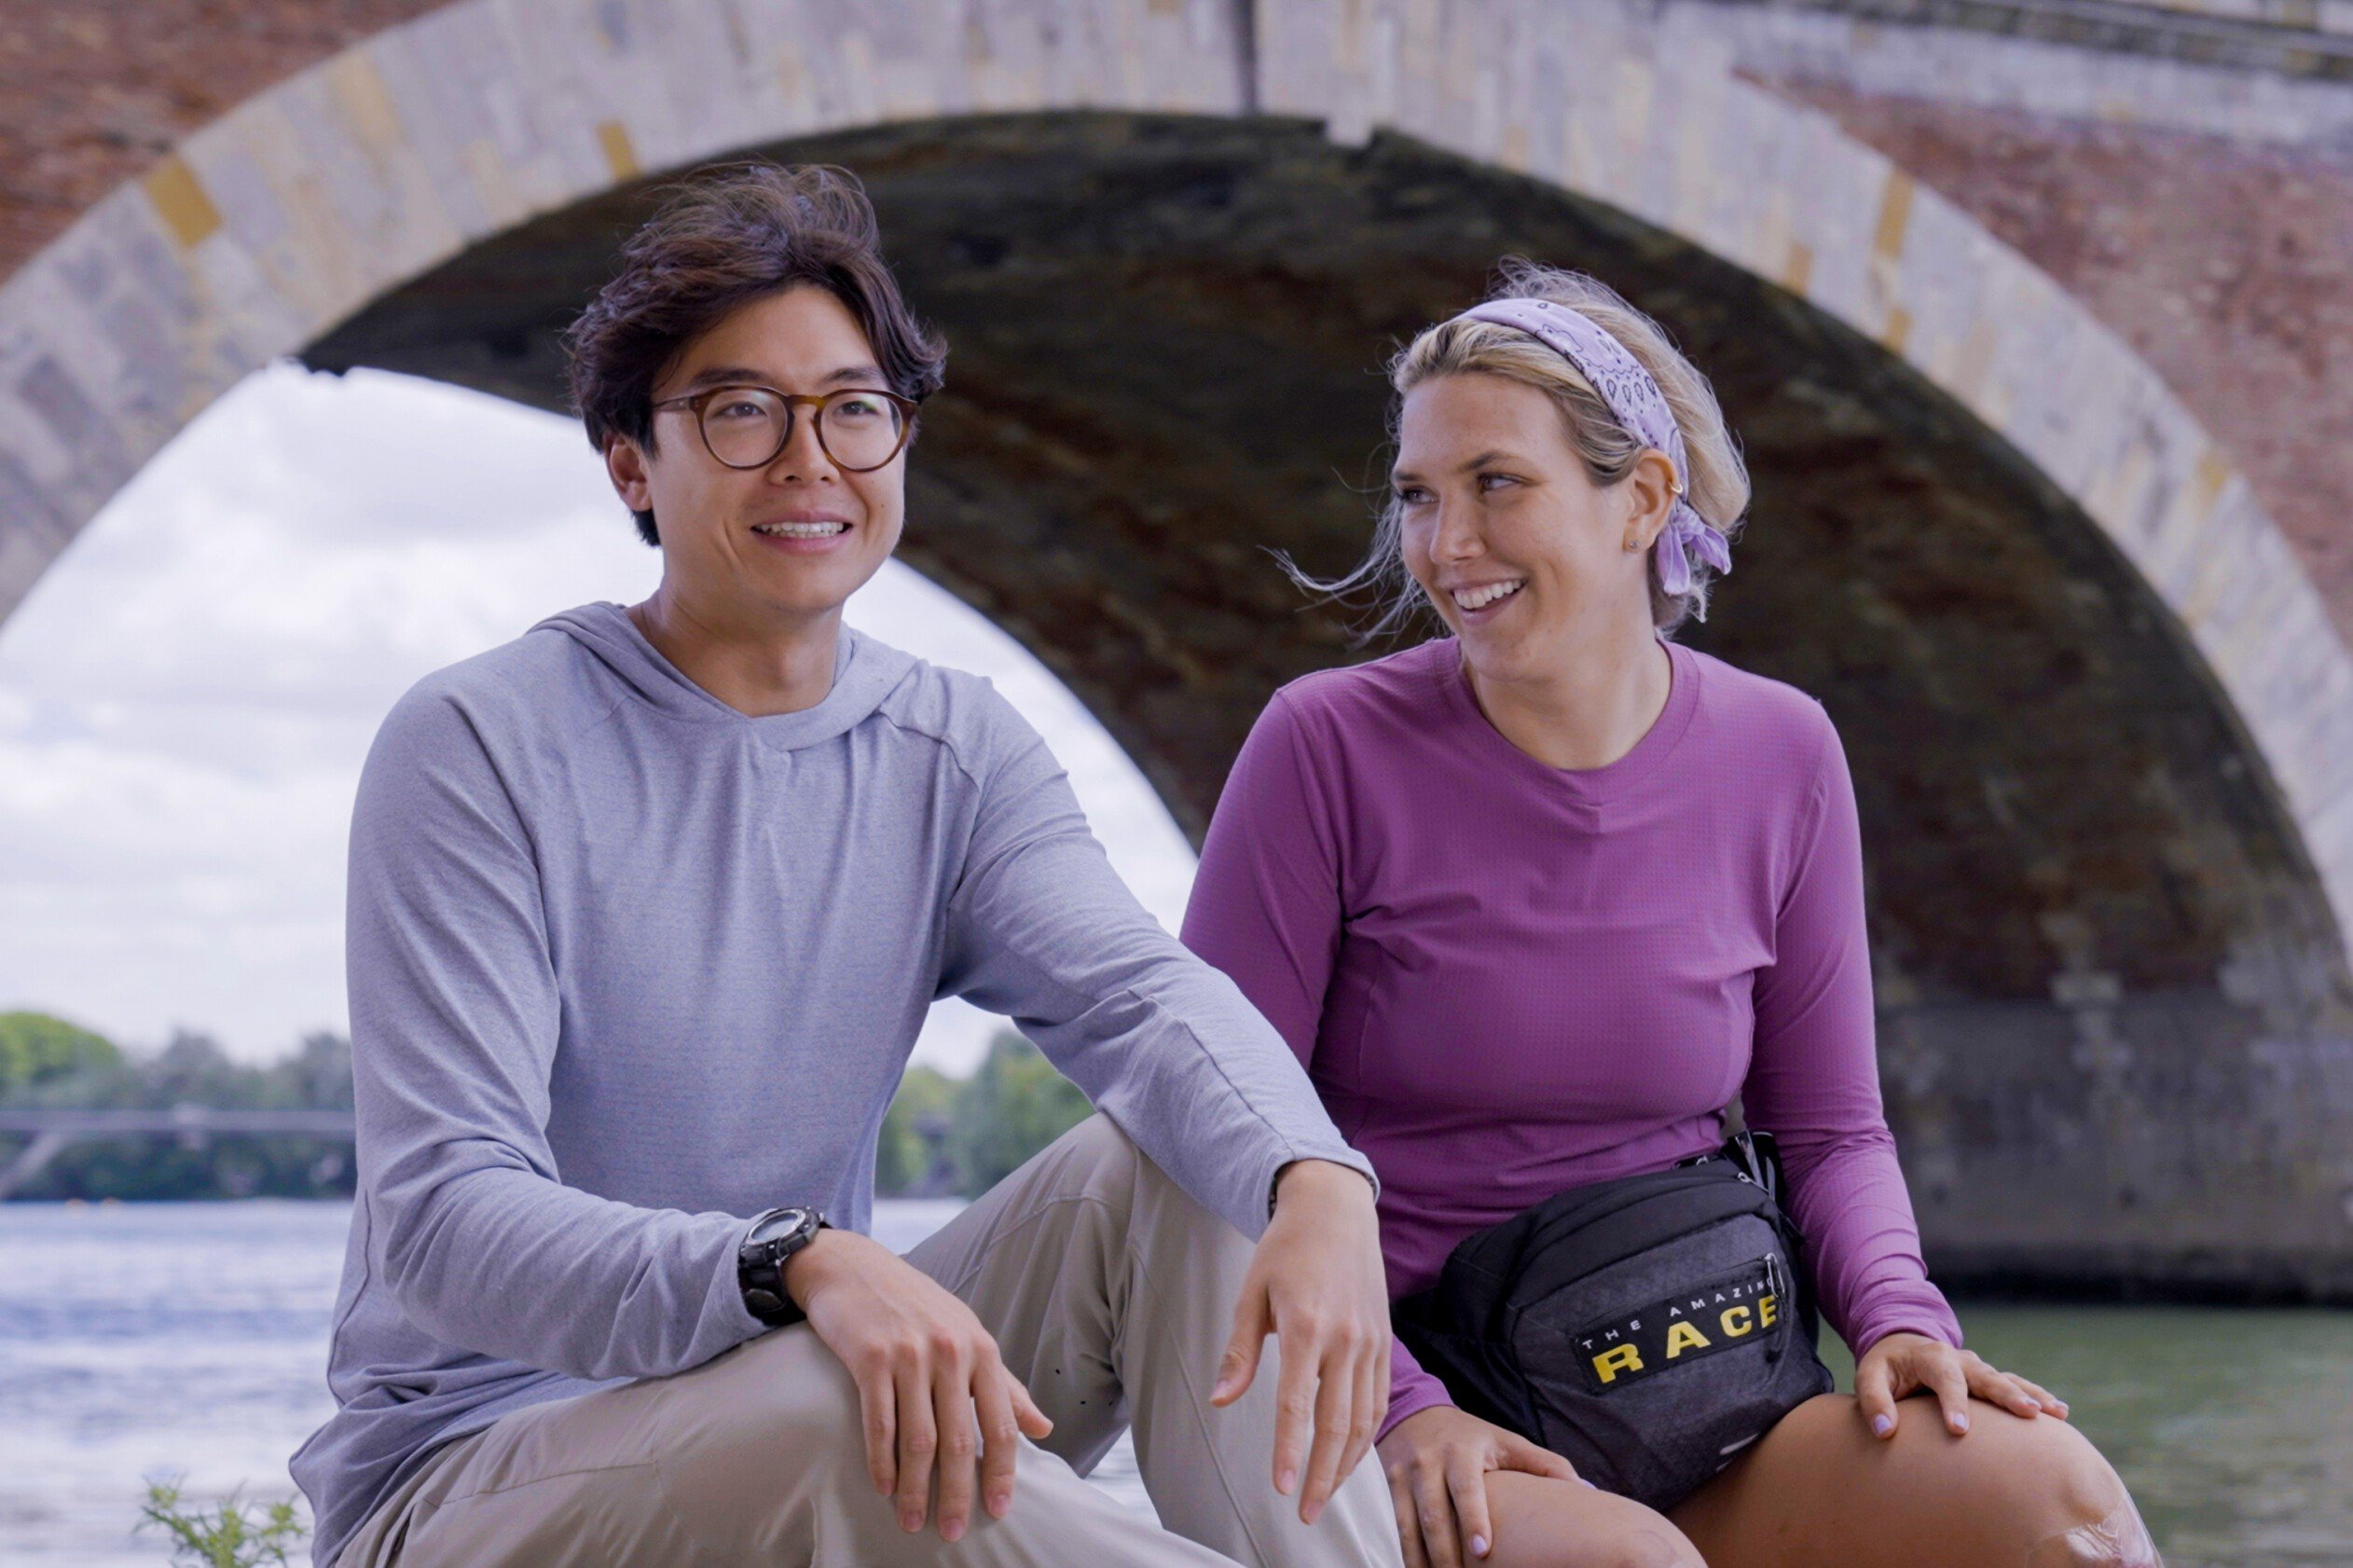 Derek Xiao and Claire Rehfuss, who star in 'The Amazing Race' Season 34 on CBS, film a confessional in front of a river. Derek wear a light blue hoodie and tan pants. Claire wears a purple long-sleeved shirt and black shorts.